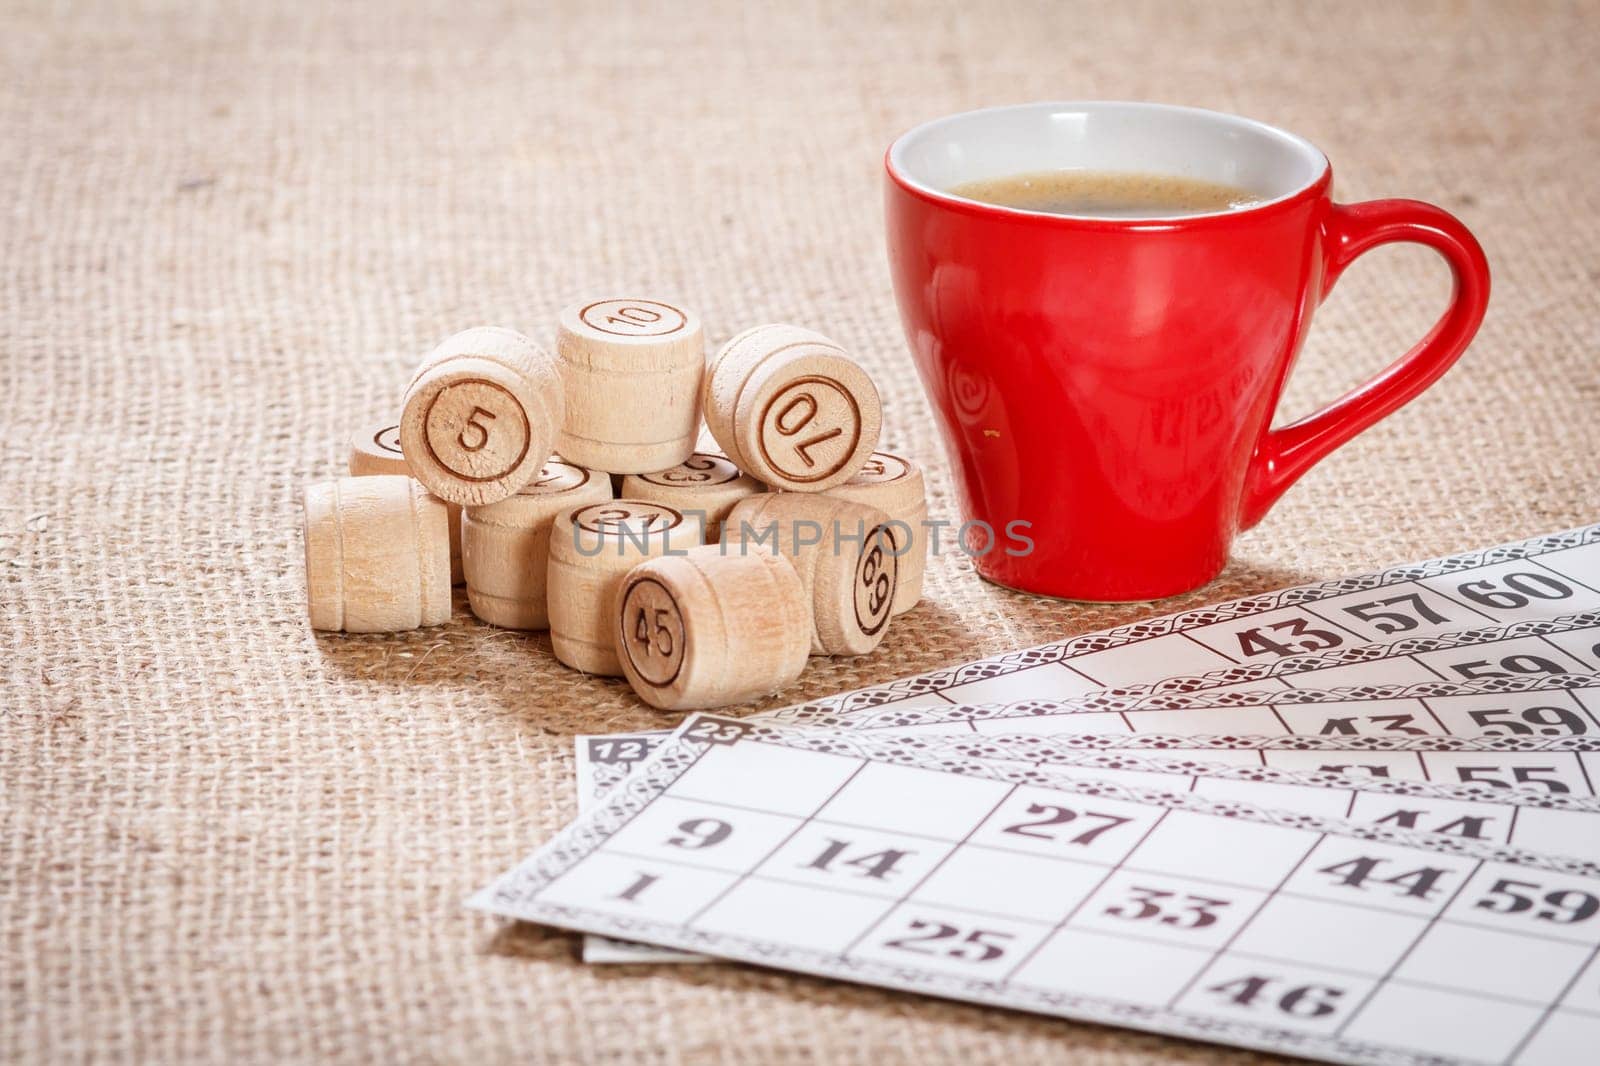 Board game lotto on sackcloth. Wooden lotto barrels and game cards for a game in lotto with red cup of coffee.